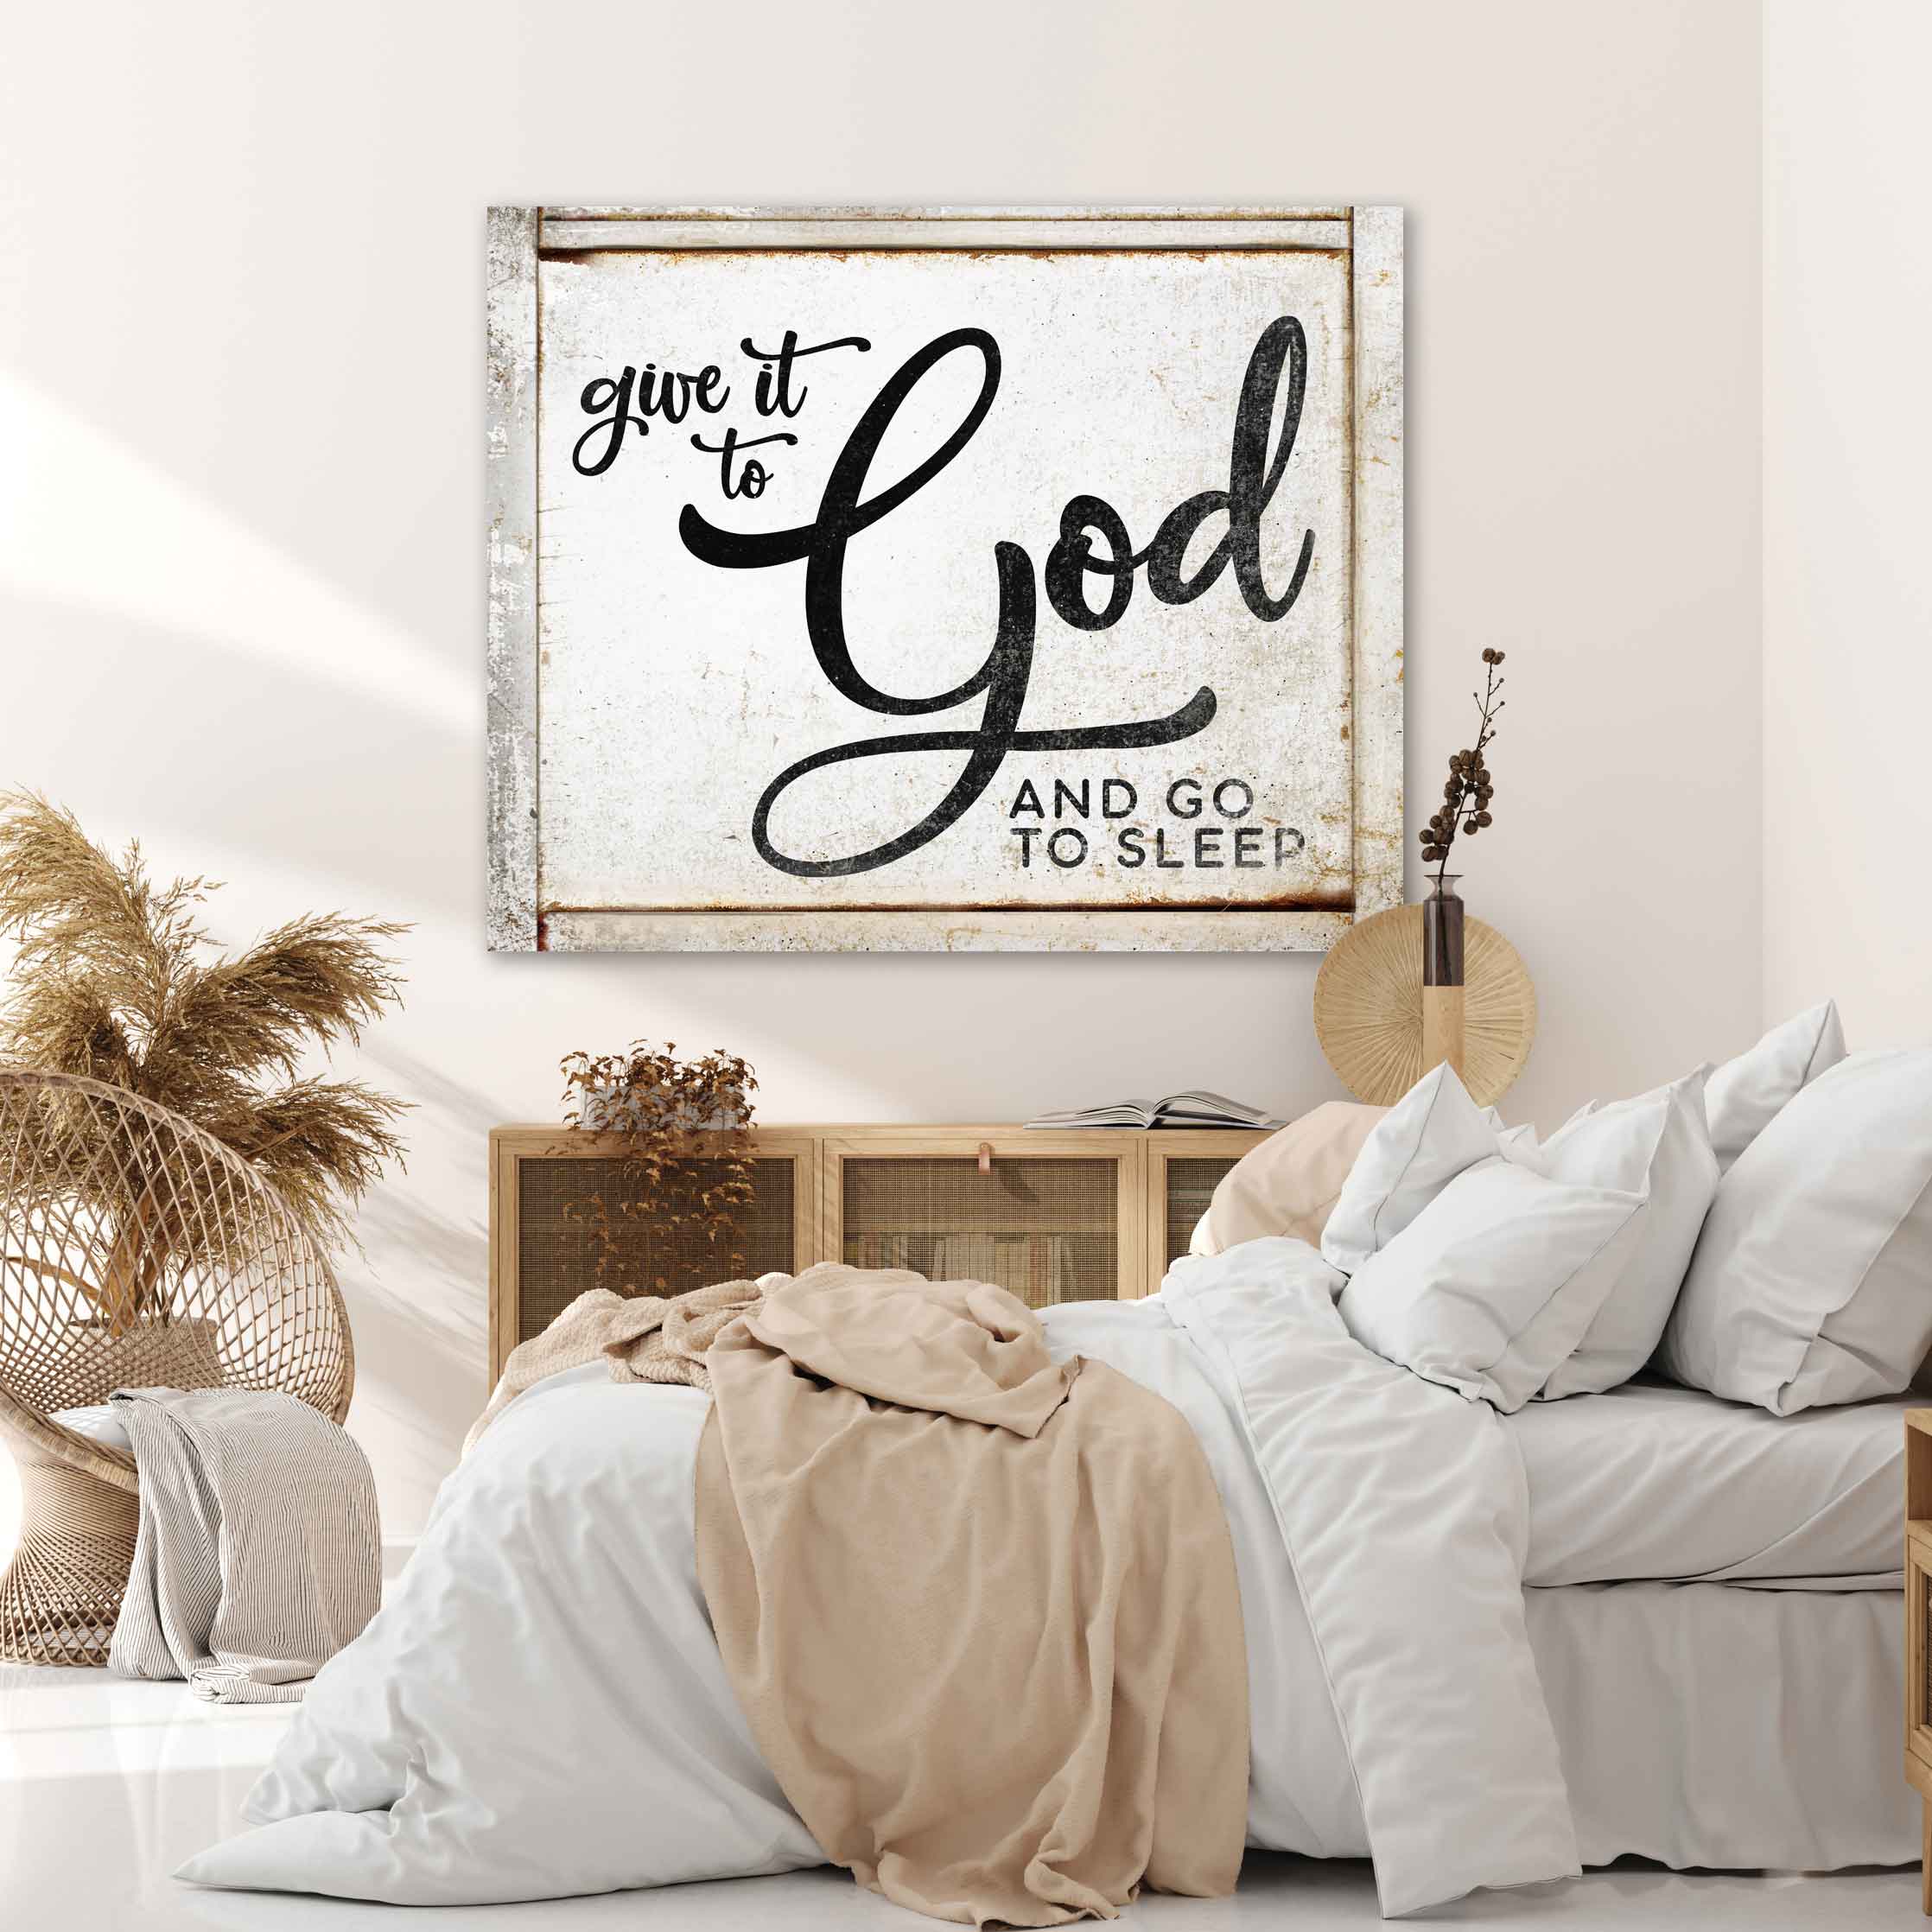 Give it to God and go to sleep sign on rustic beige background frame